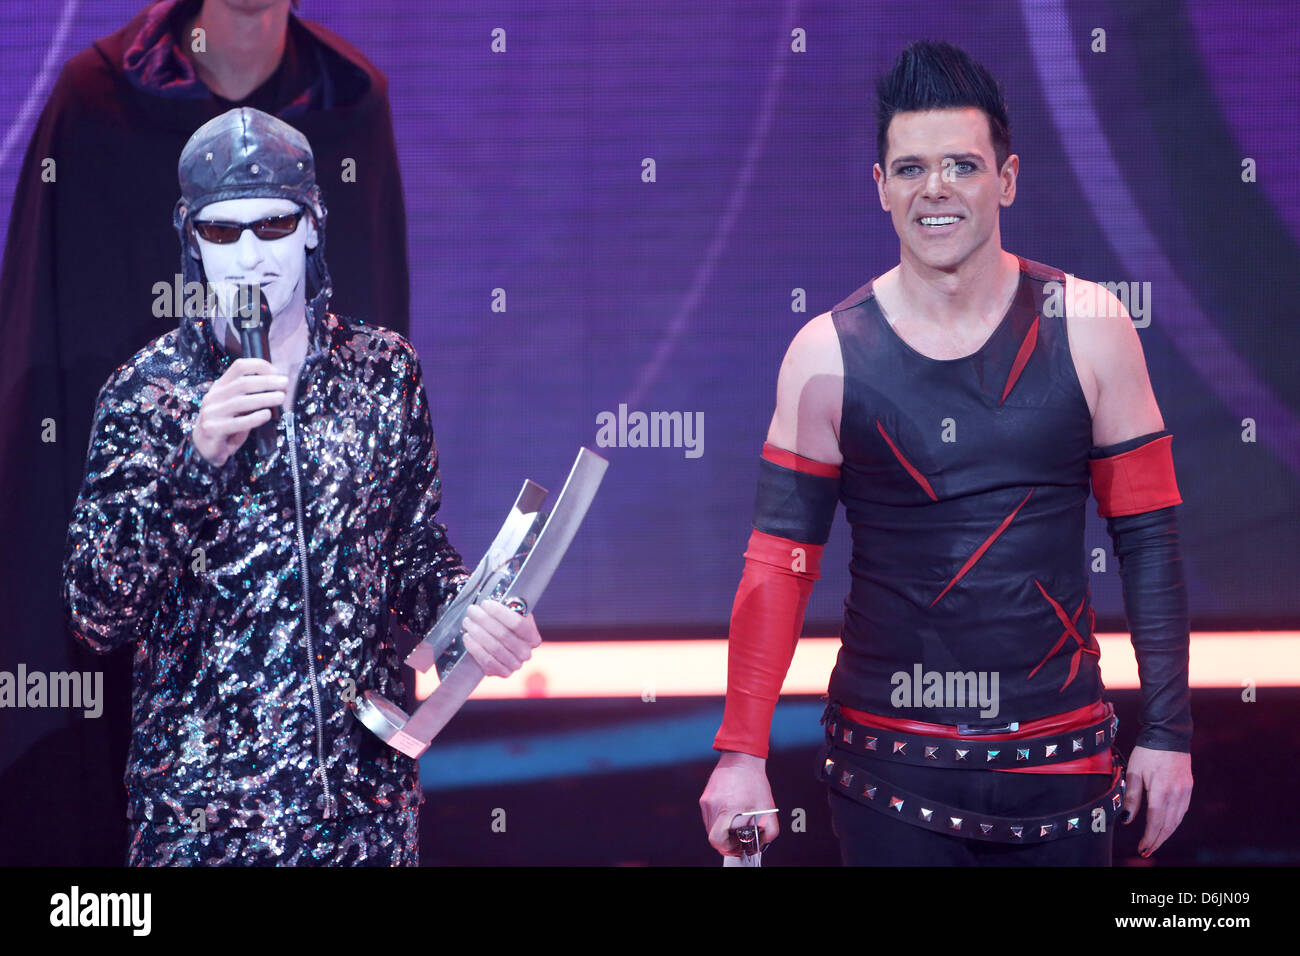 Till Lindemann (R), singer of German band Rammstein, receives the 2012 Echo  Music Award during the Echo Awards ceremony in Berlin, Germany, 22 March  2012. The Echo Music Award is presented in